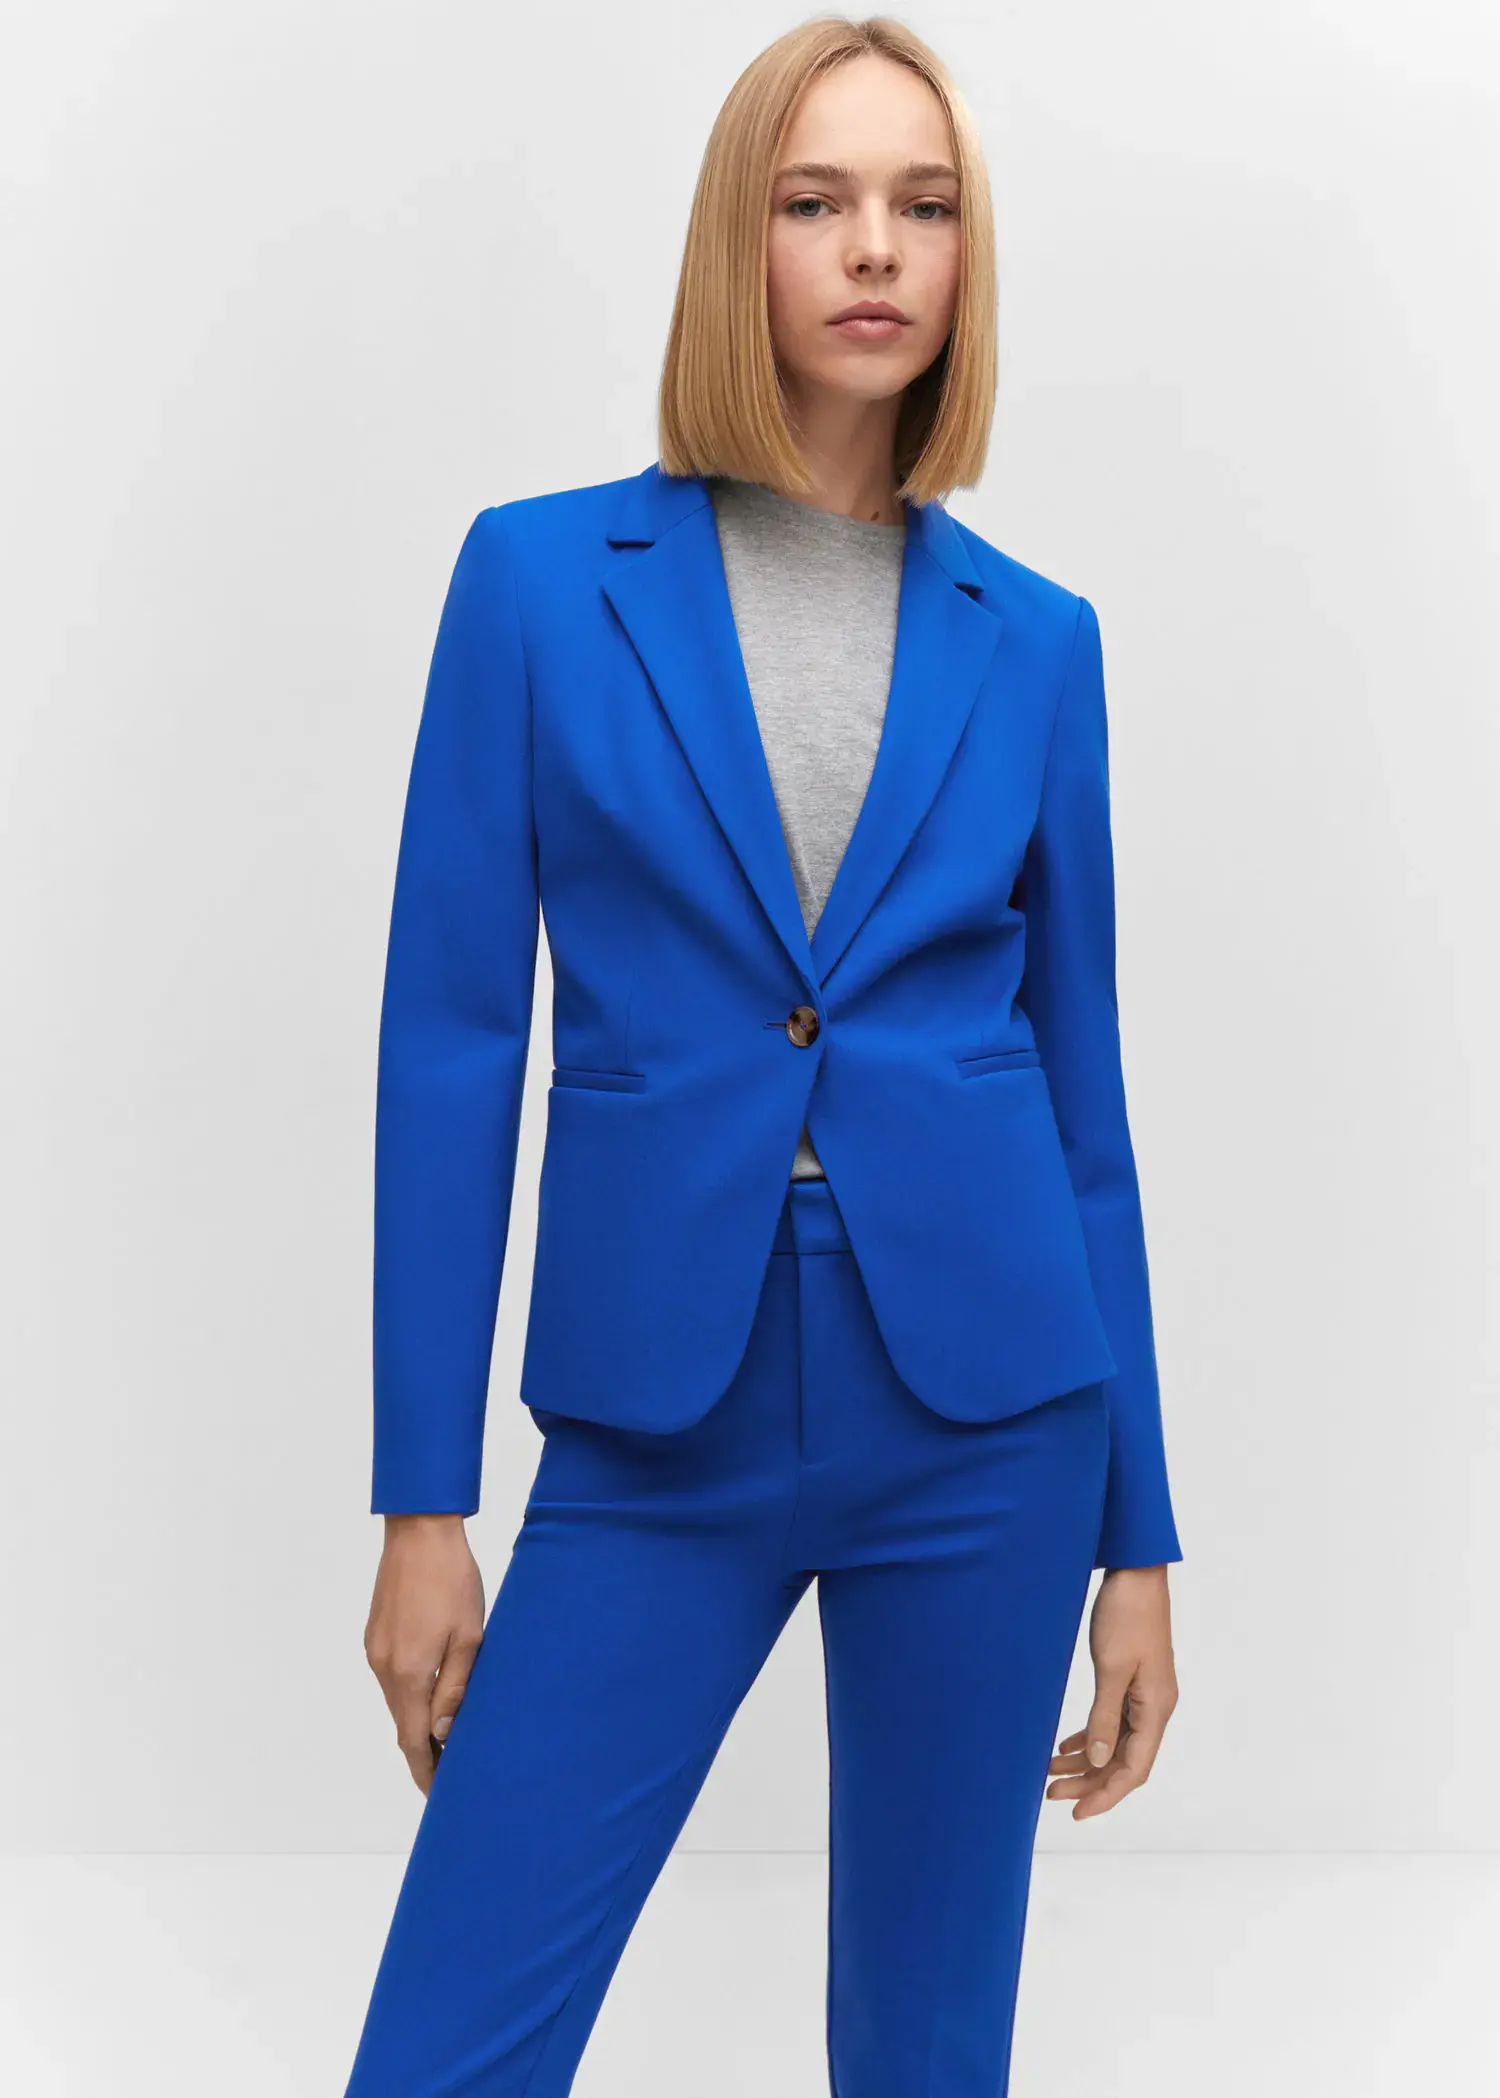 Mango Fitted jacket with blunt stitching. a woman wearing a blue jacket and pants. 